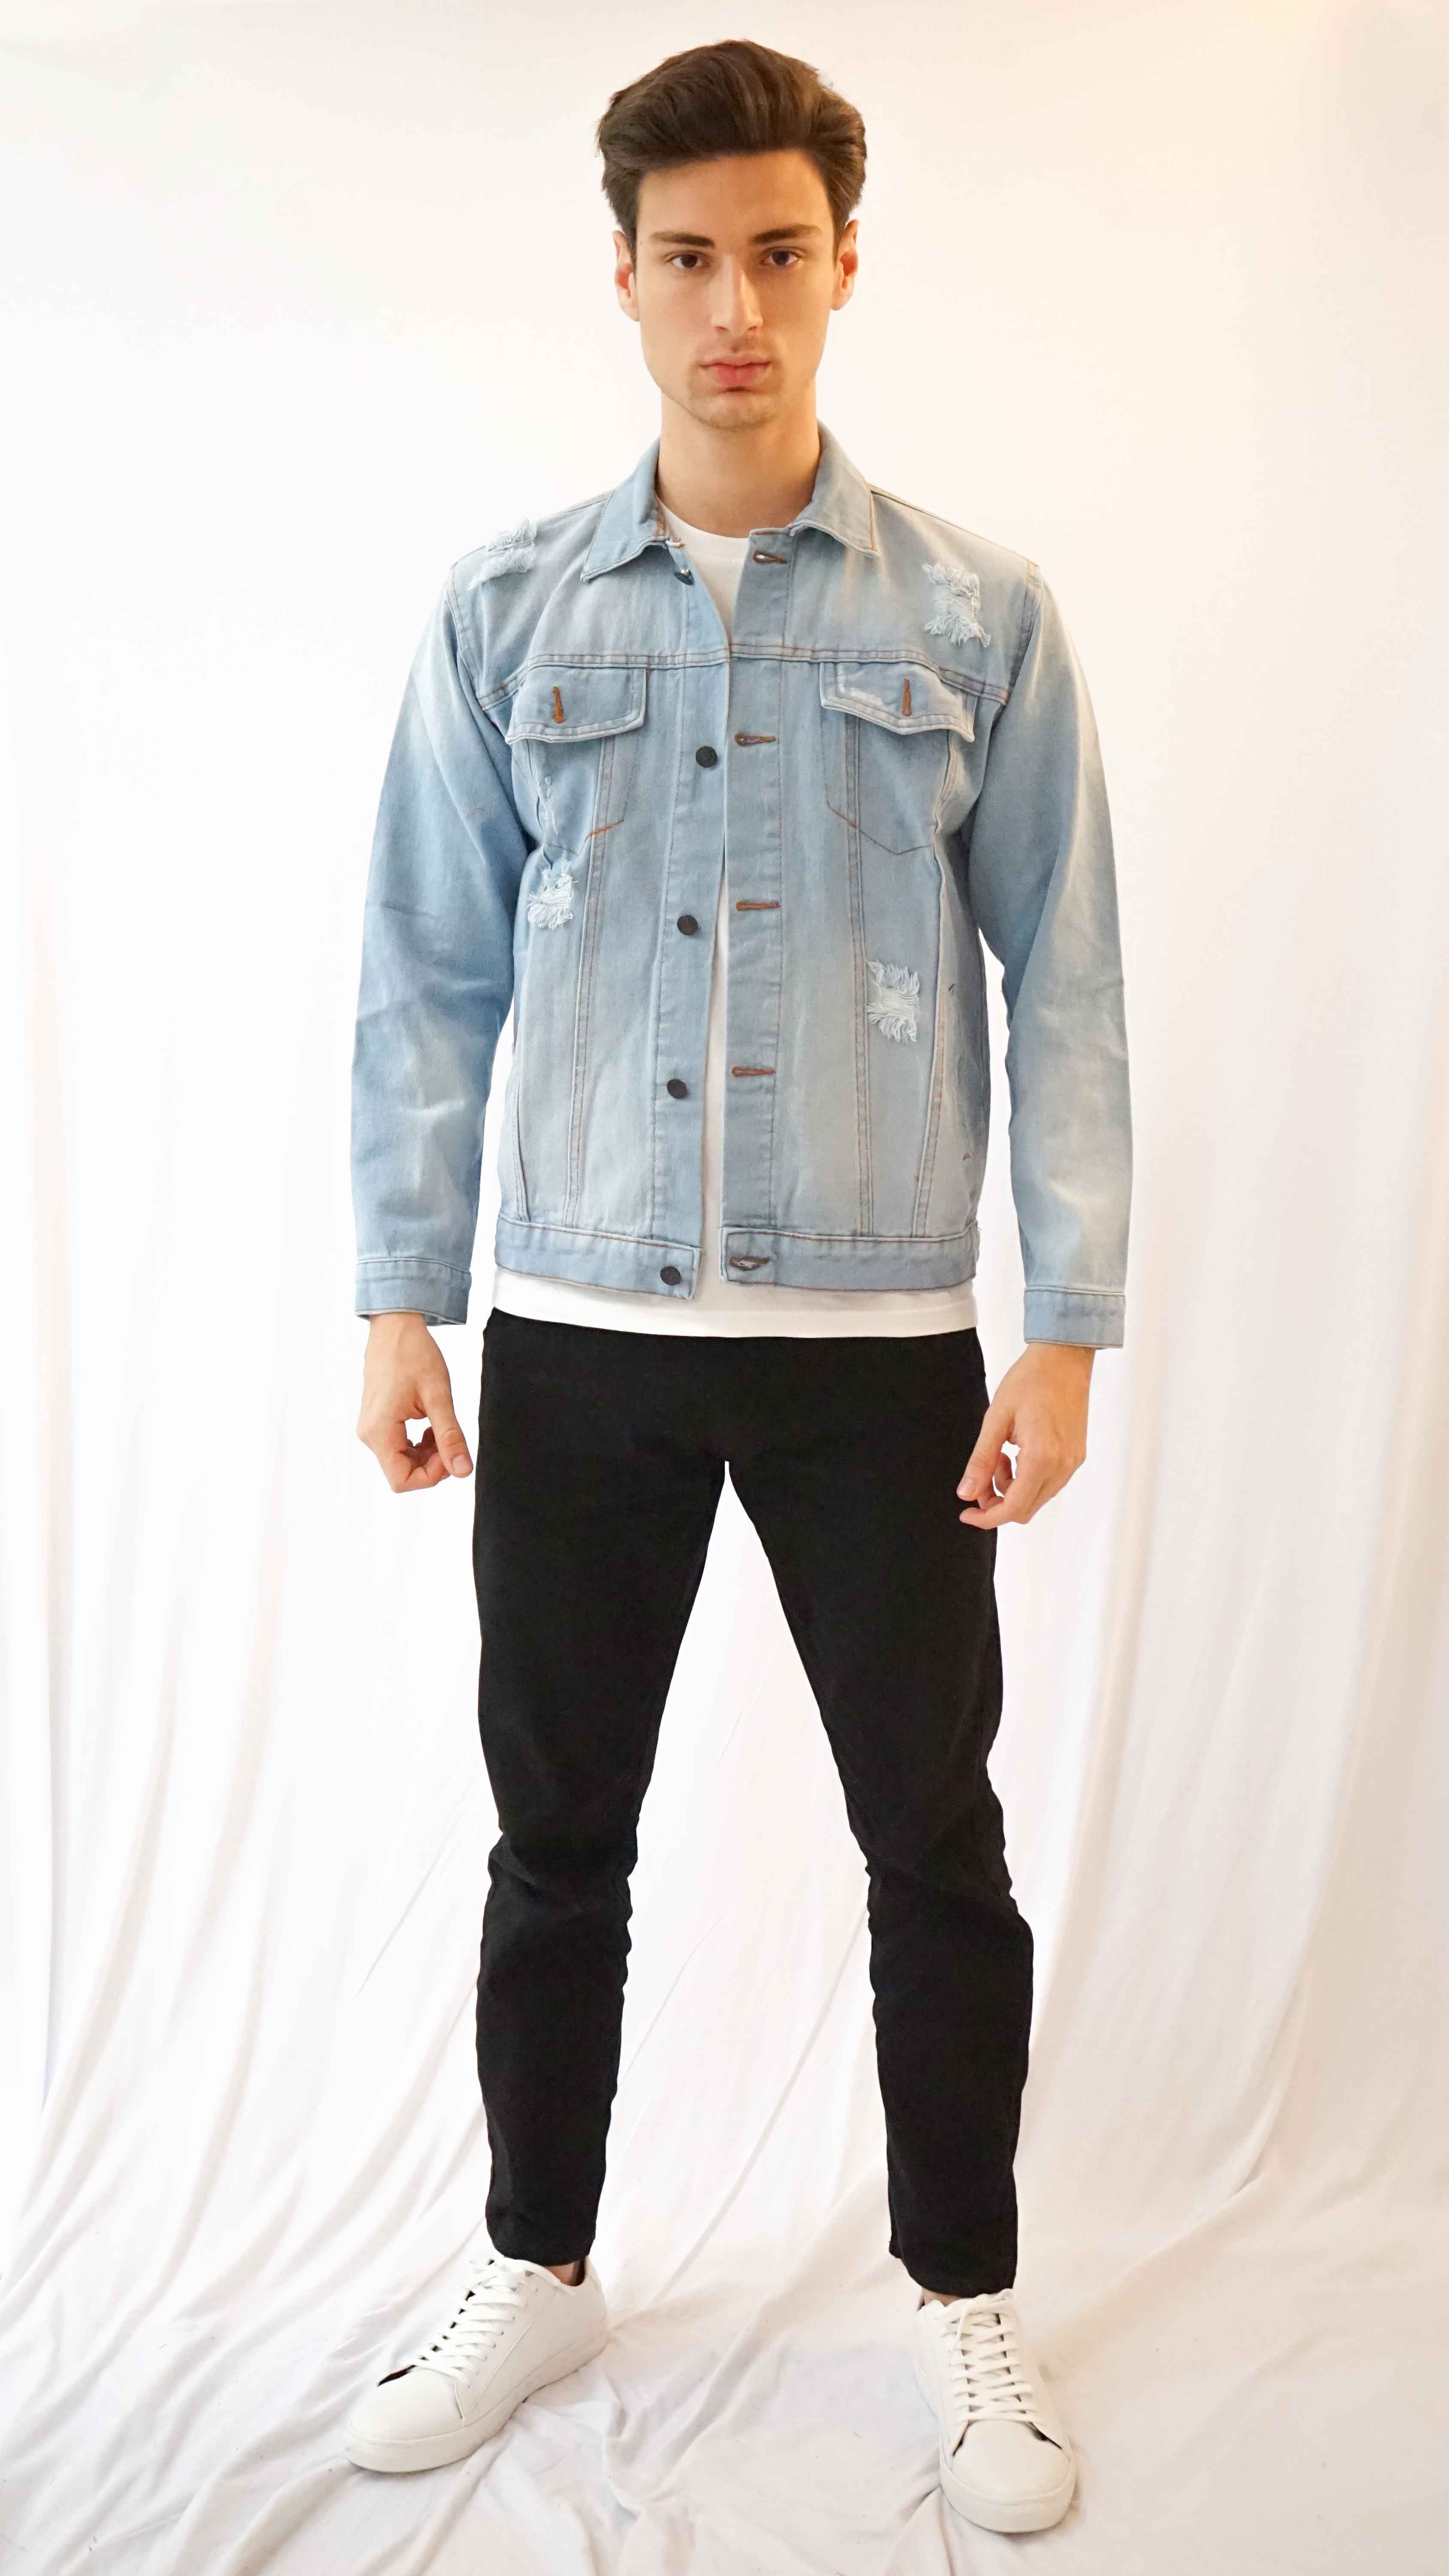 JEANS JACKET BLUE WASHED RIPPED